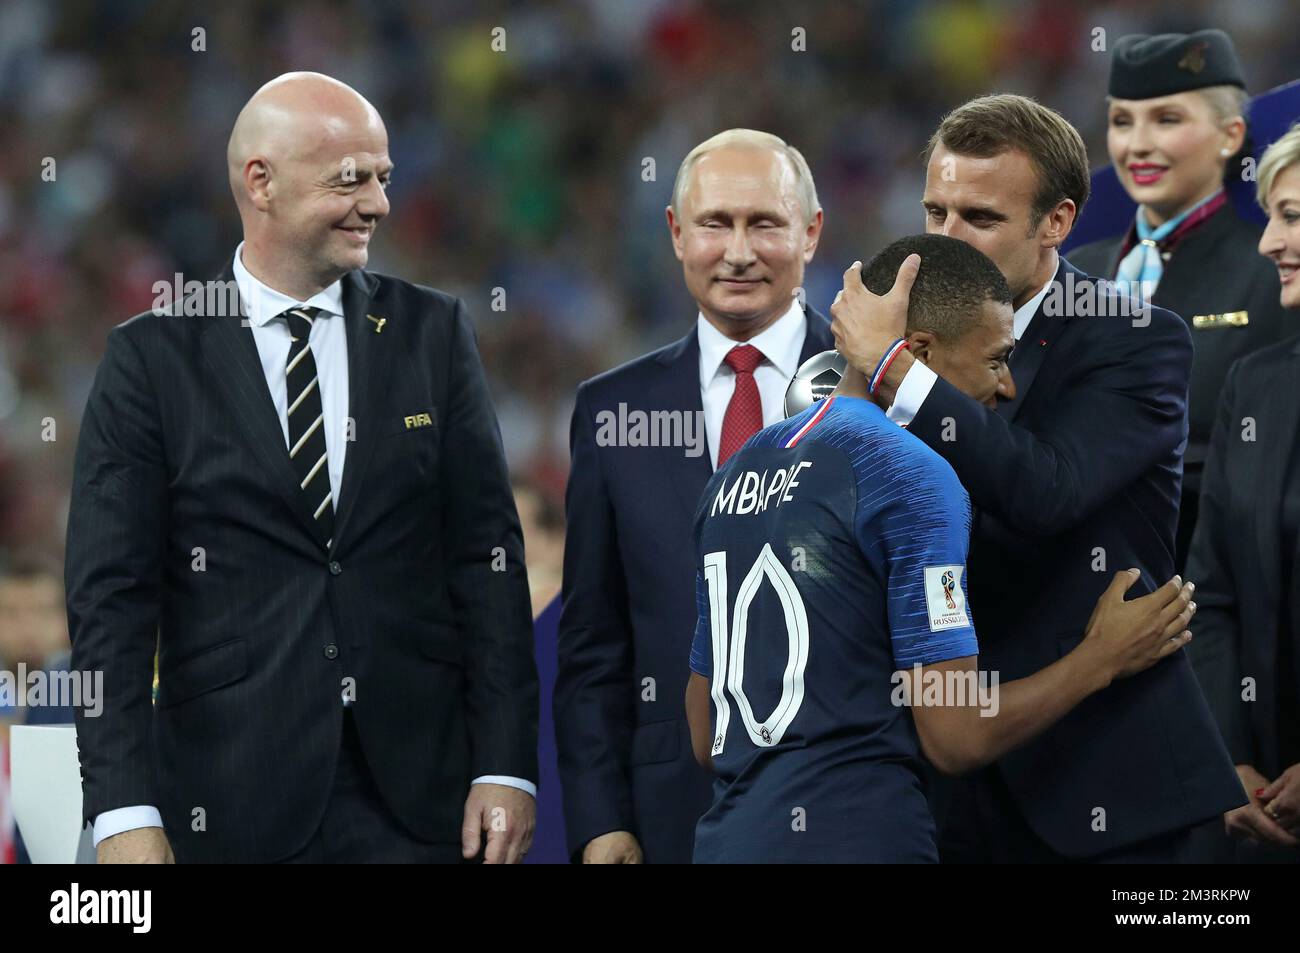 firo : 07/15/2018, Moscow, football, soccer, national team, World Cup 2018 in Russia, Russia, World Cup 2018 in Russia, Russia, World Cup 2018 Russia, Russia, final, final, France - Croatia, 4 :2, award ceremony, France is world champion 2018 FIFA President Giovanni INFANTINO, Emmanuel Jean-Michel Fr?d?ric Macron, President, President of France, Vladimir Vladimirovich Putin, President of the Russian Federation, FRA Mbapp? Mbappe, Kylian, Best Young Player Honors, Young Talent Player Stock Photo